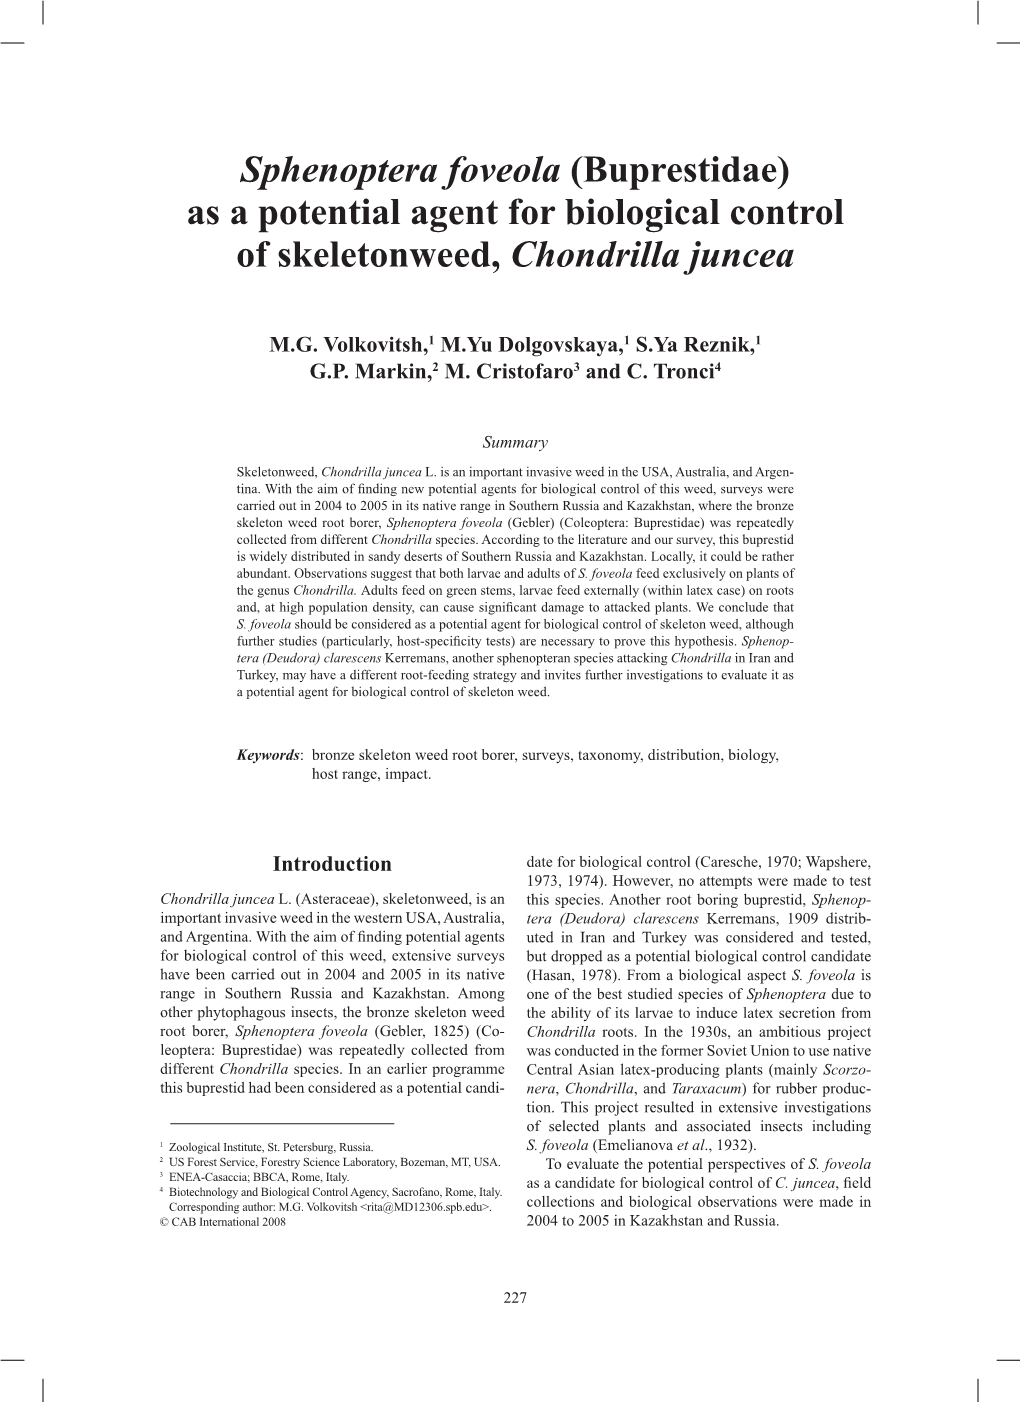 (Buprestidae) As a Potential Agent for Biological Control of Skeletonweed, Chondrilla Juncea